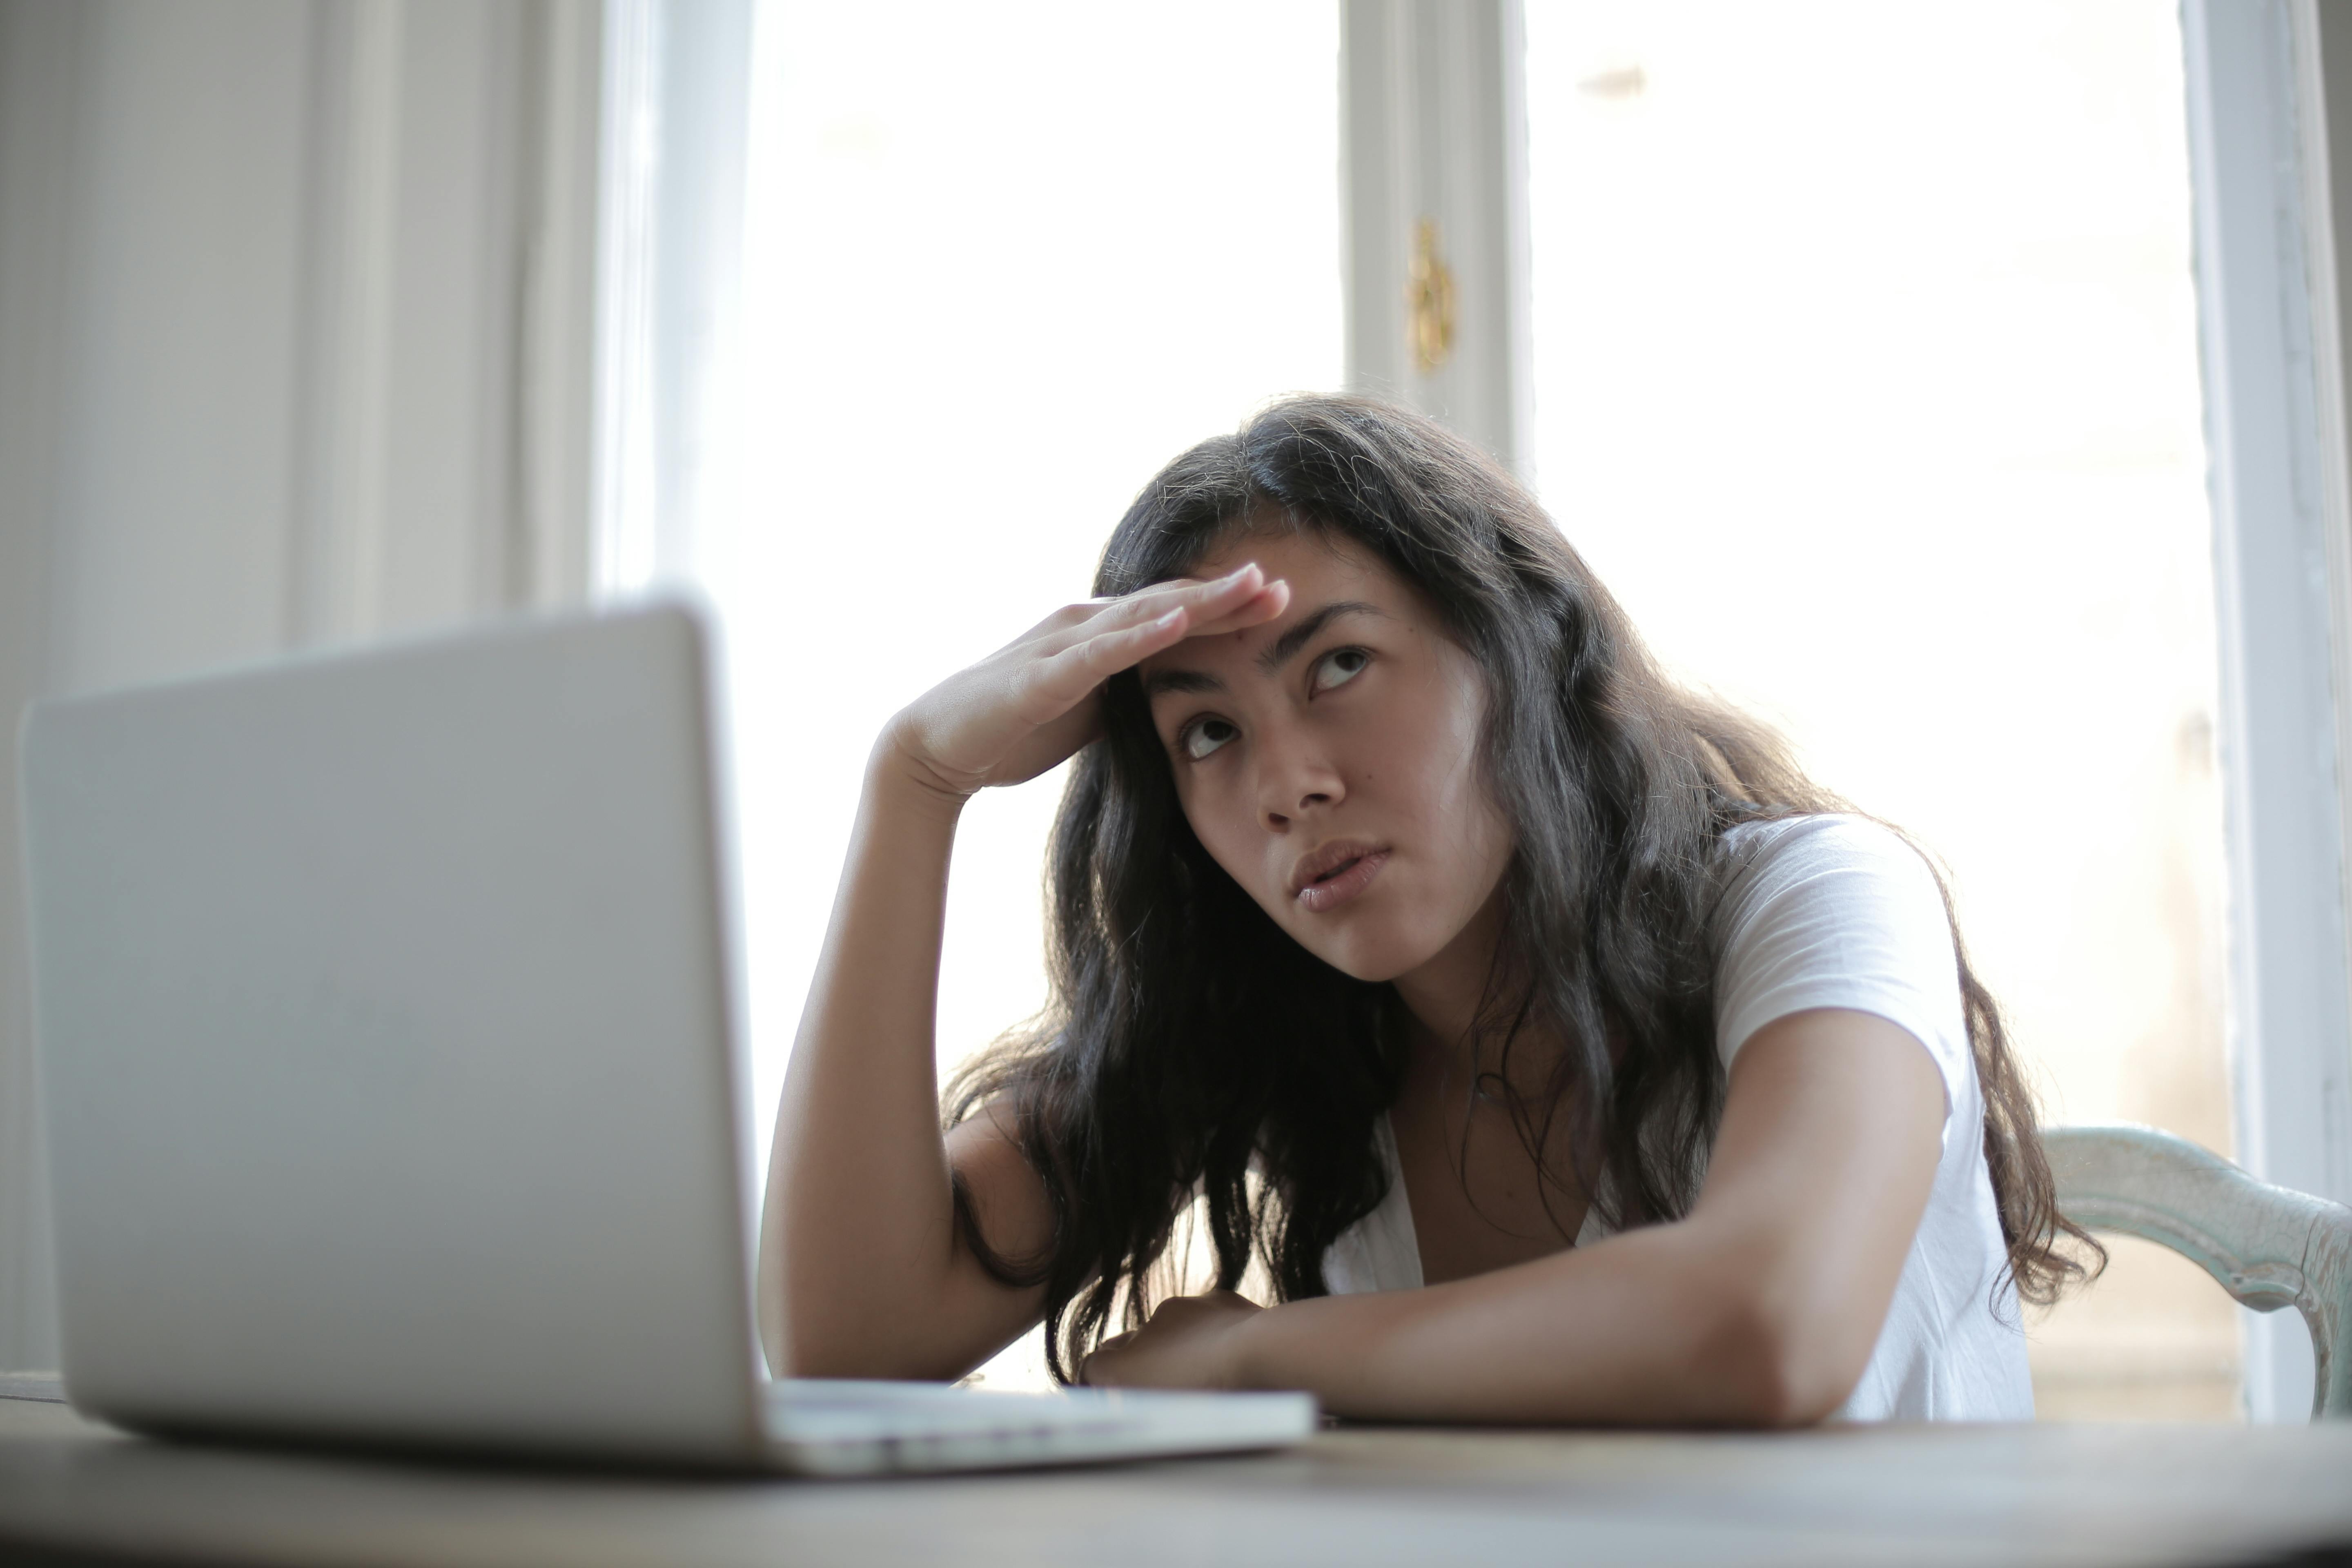 An upset-looking woman staring up at someone while using a laptop | Source: Pexels